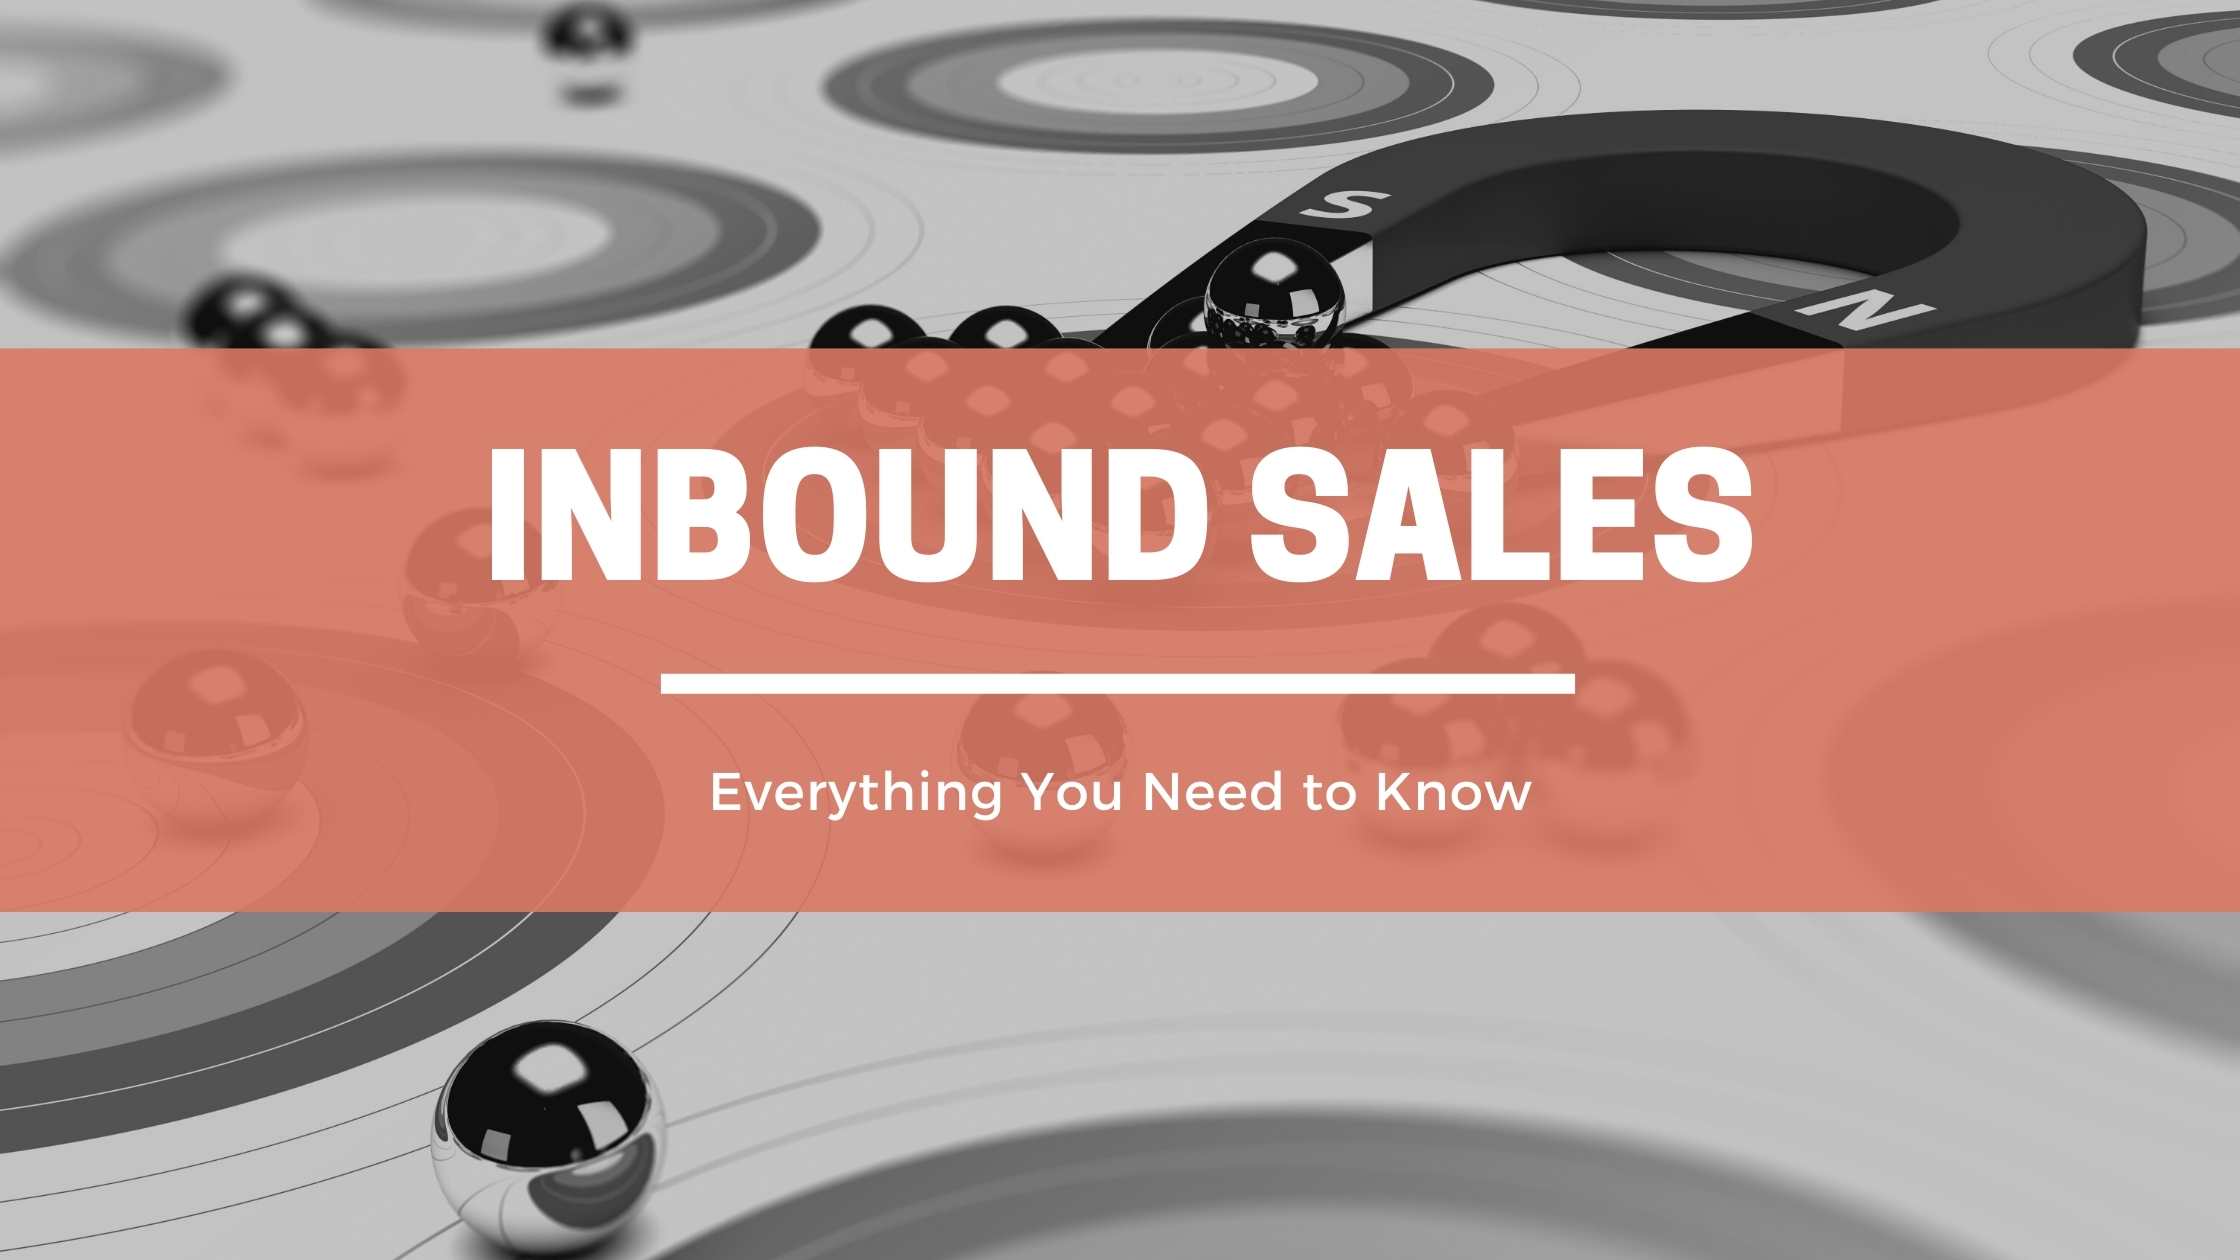 Inbound Sales WorkBook: The How, Strategy, and Tactics - Adilo Blog